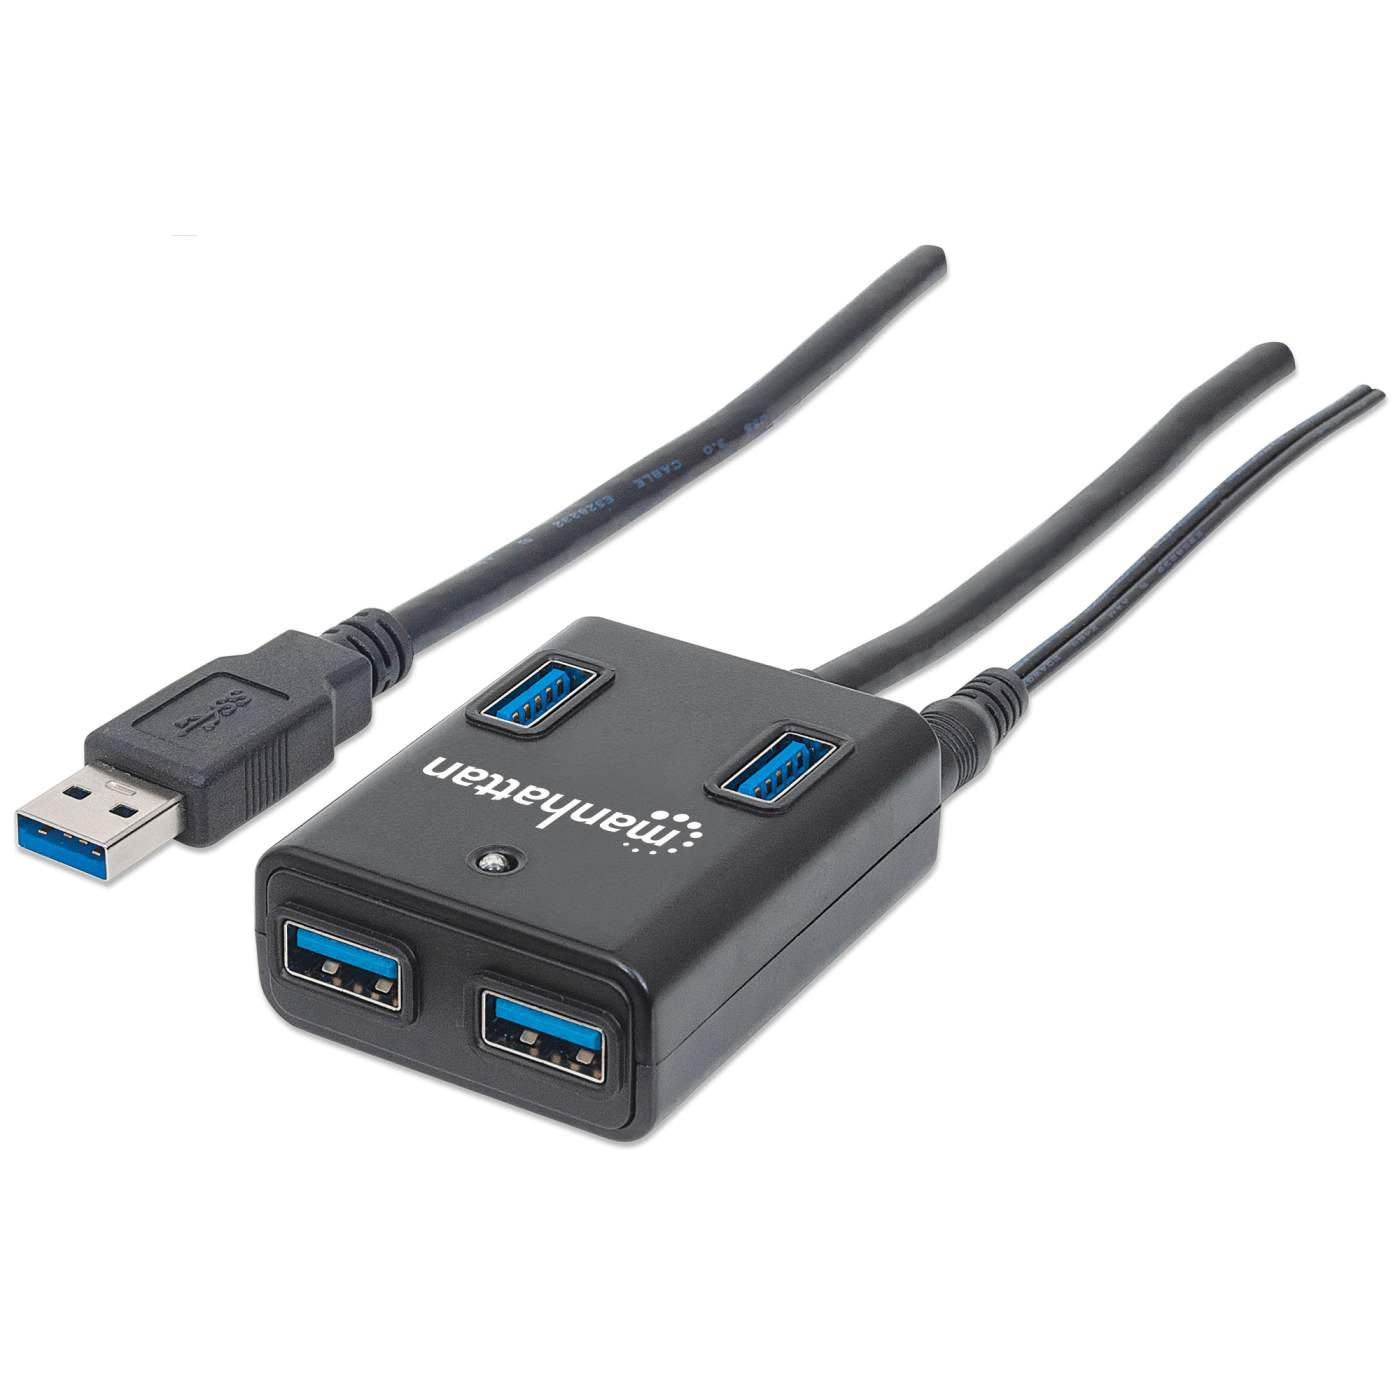 4-Port USB 3.0 Sharing Switch, Superspeed